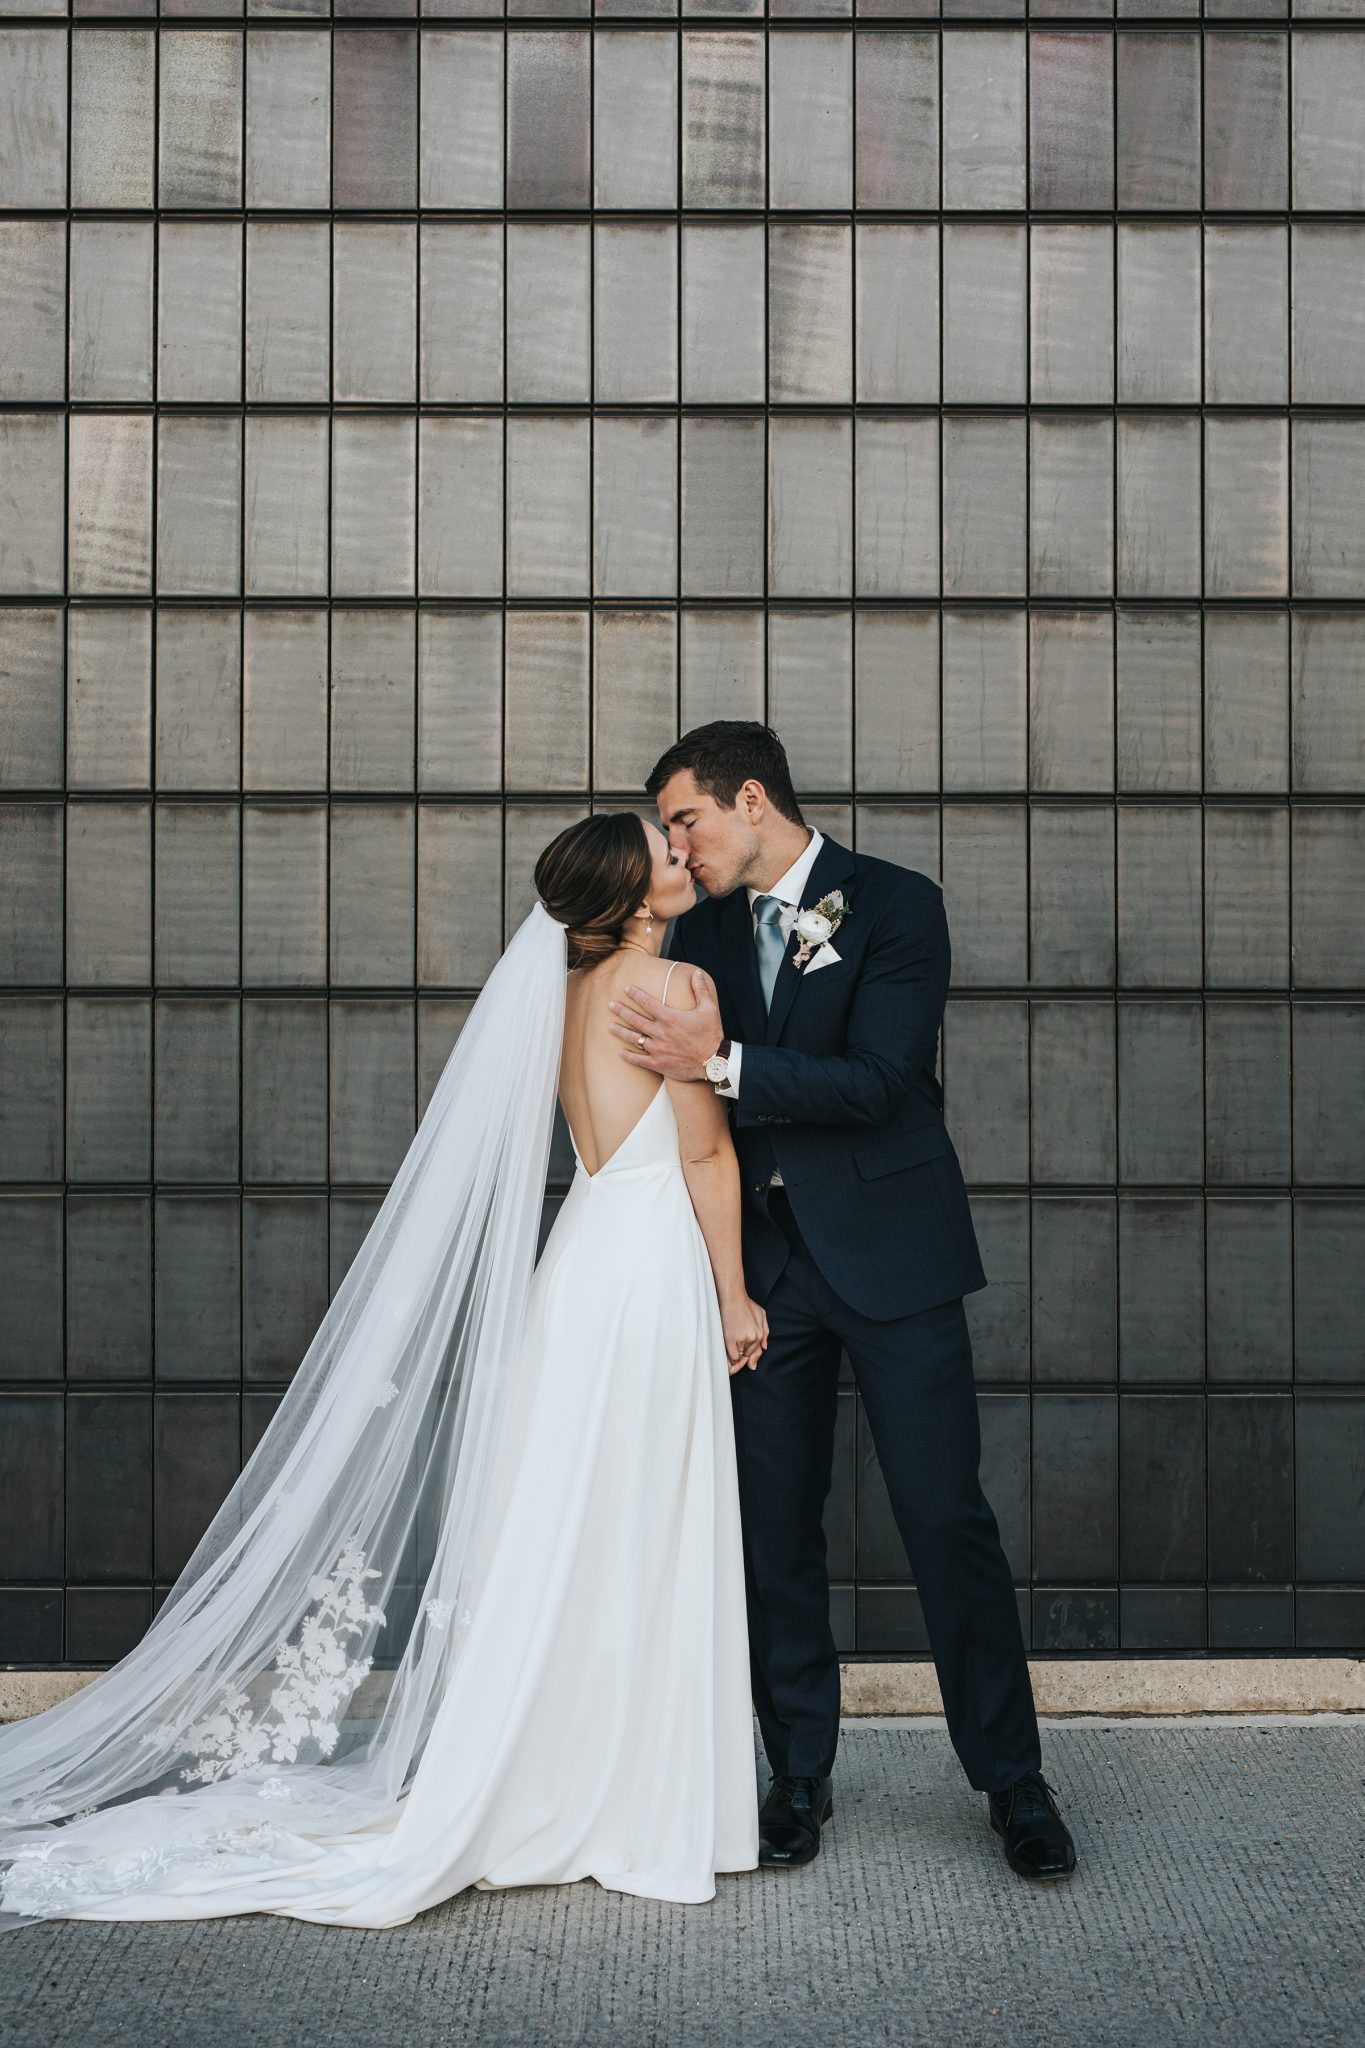 This Couple Decided To Split Up Their Celebrations with A Double-Header Wedding at Venue 308 Featured on Brontë Bride, groom attire, modern bride